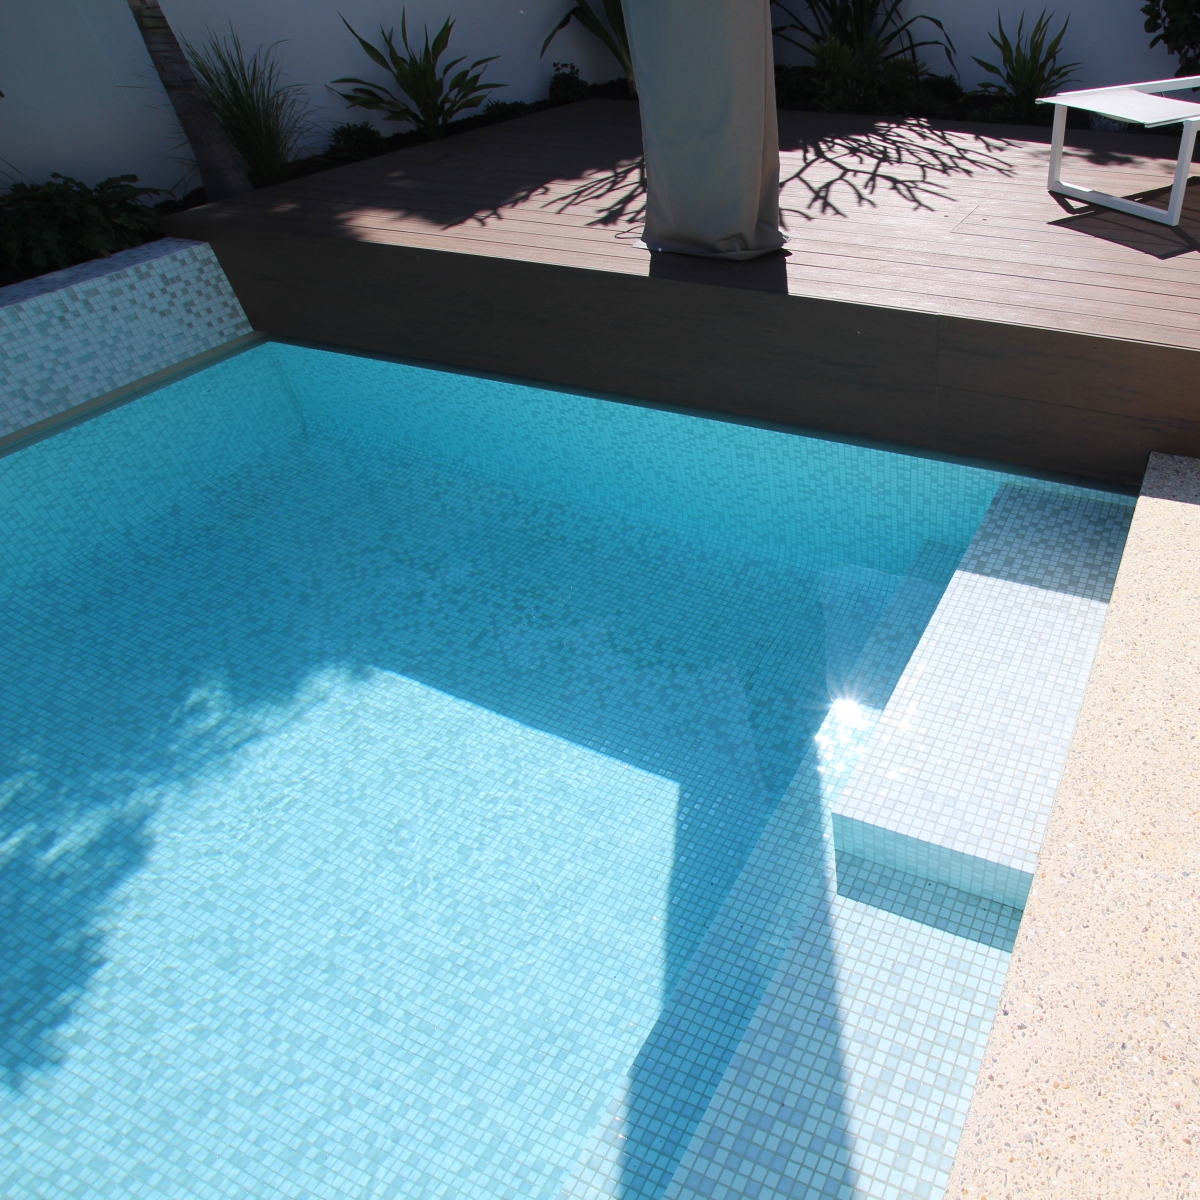 Are your pool tiles safe? 3